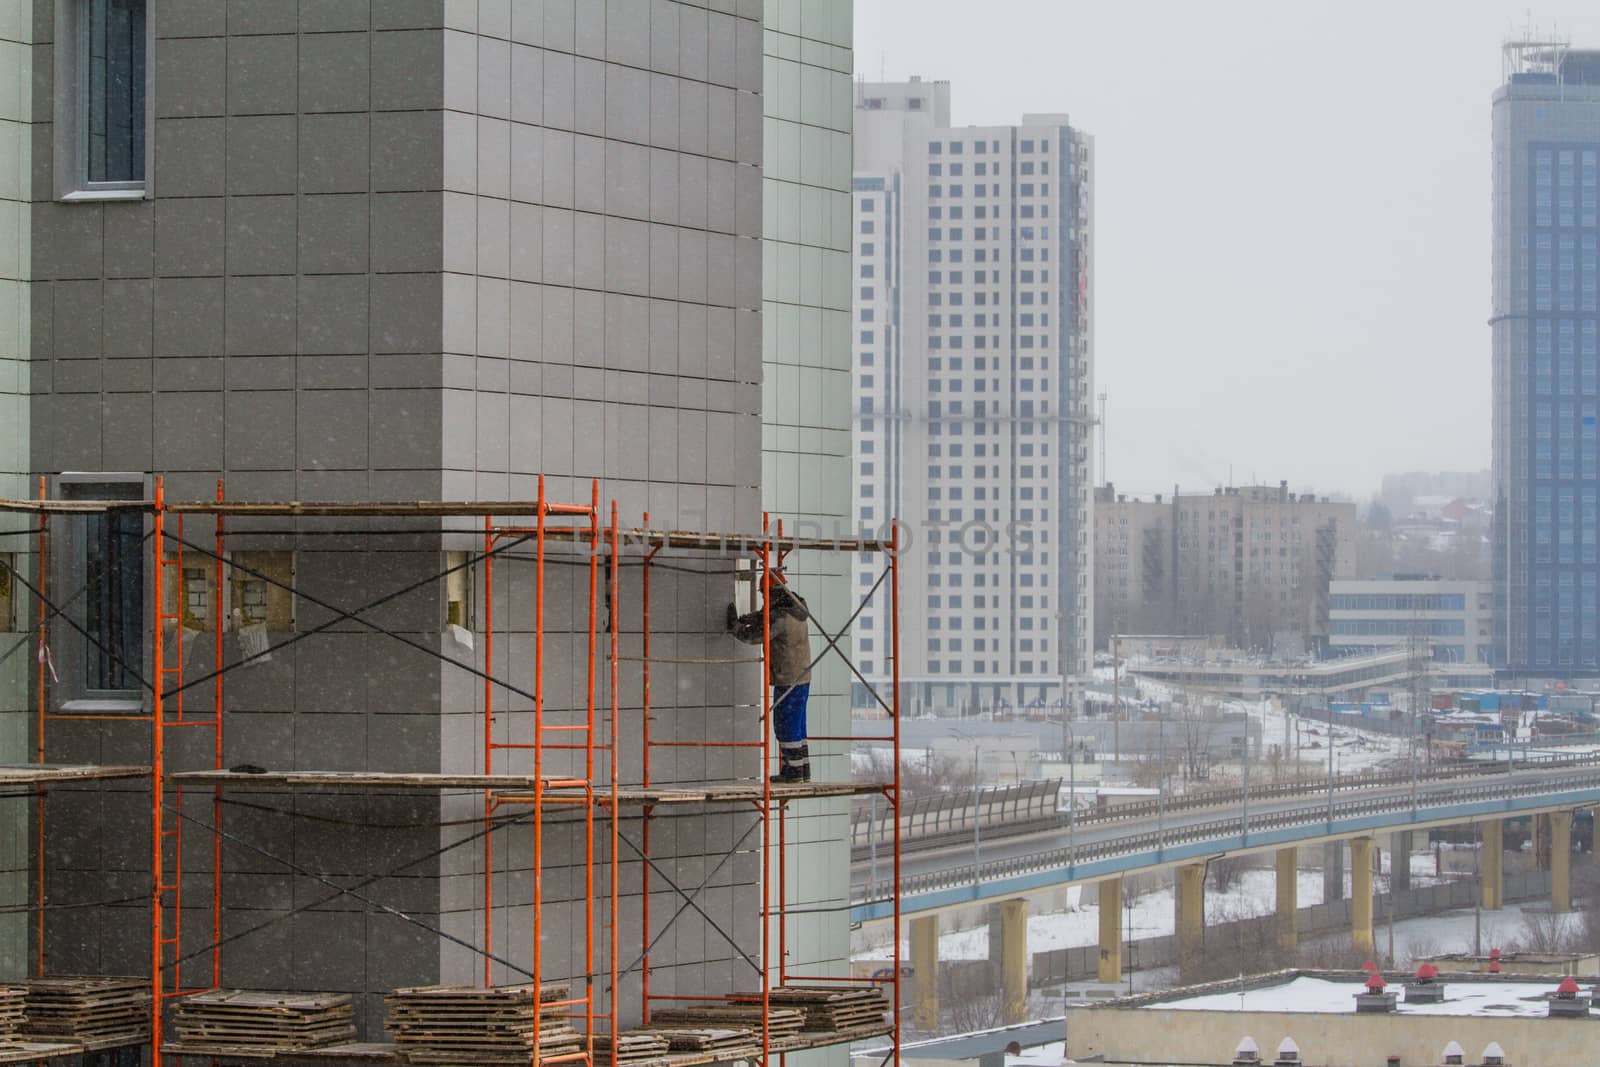 A construction worker on a high wall - Stock Image